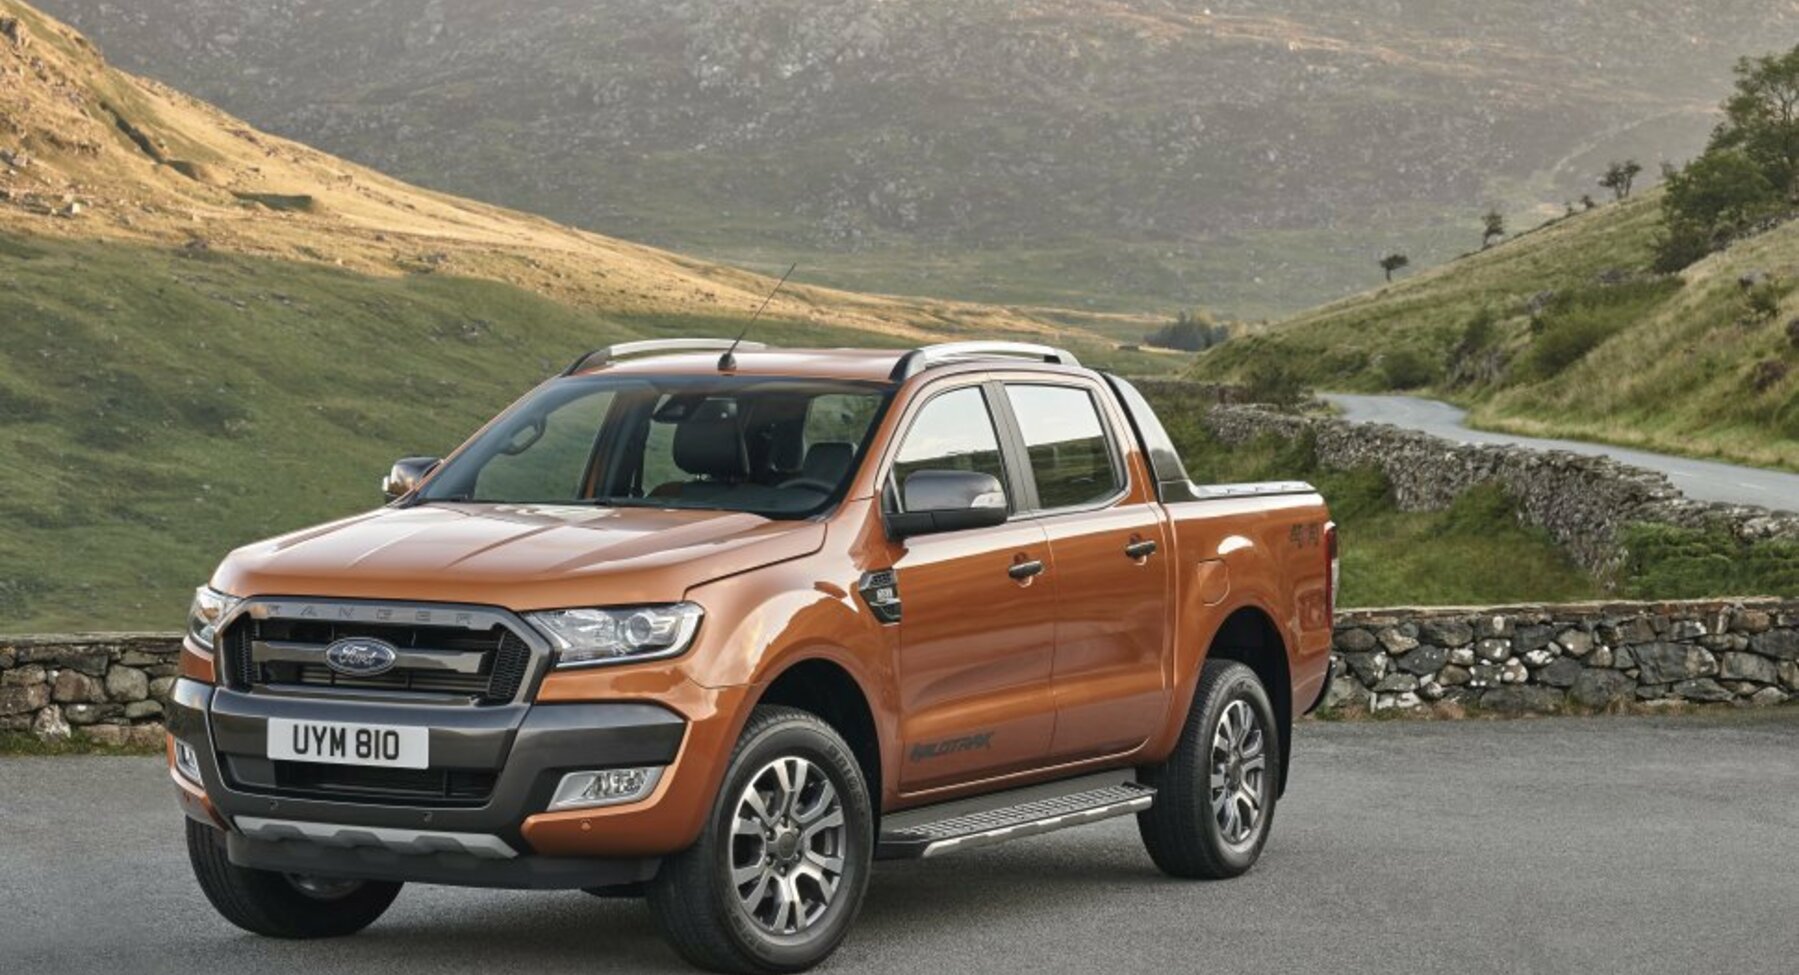 Ford Ranger III Double Cab (facelift 2015) 2.2 TDCi (160 Hp) 2015, 2016, 2017, 2018 